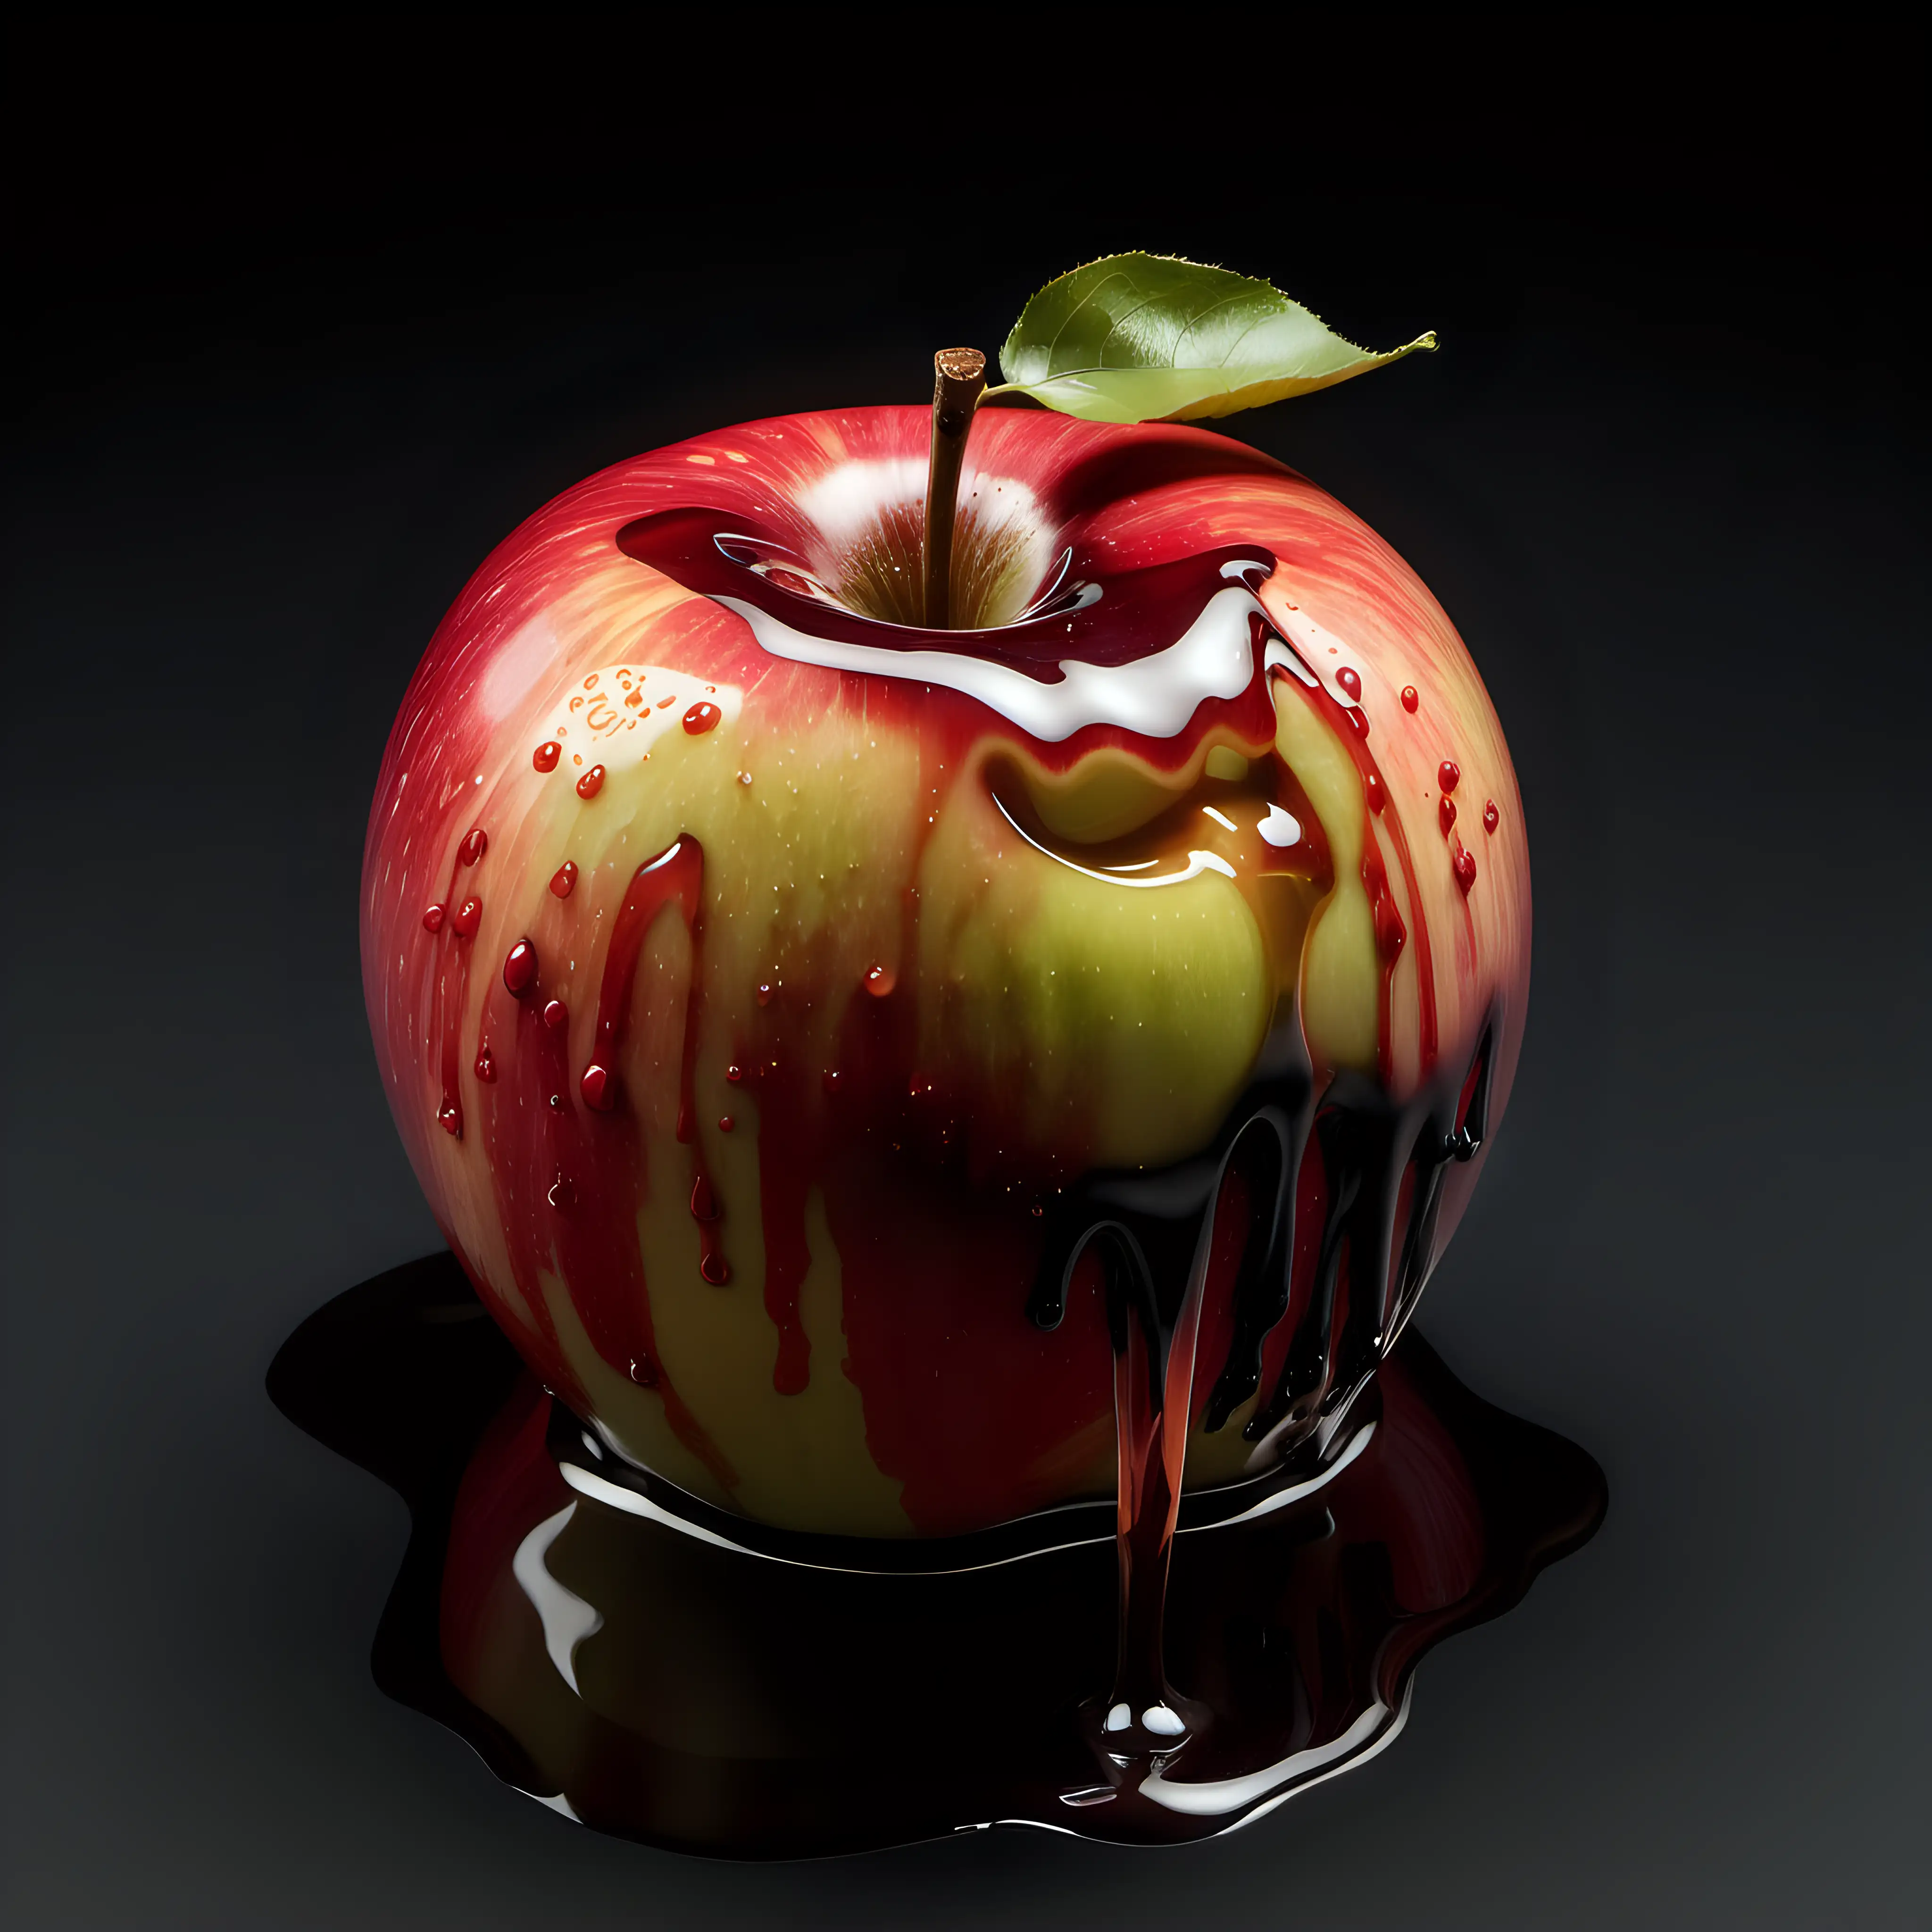 Melting Apple in a Surreal Negative Space